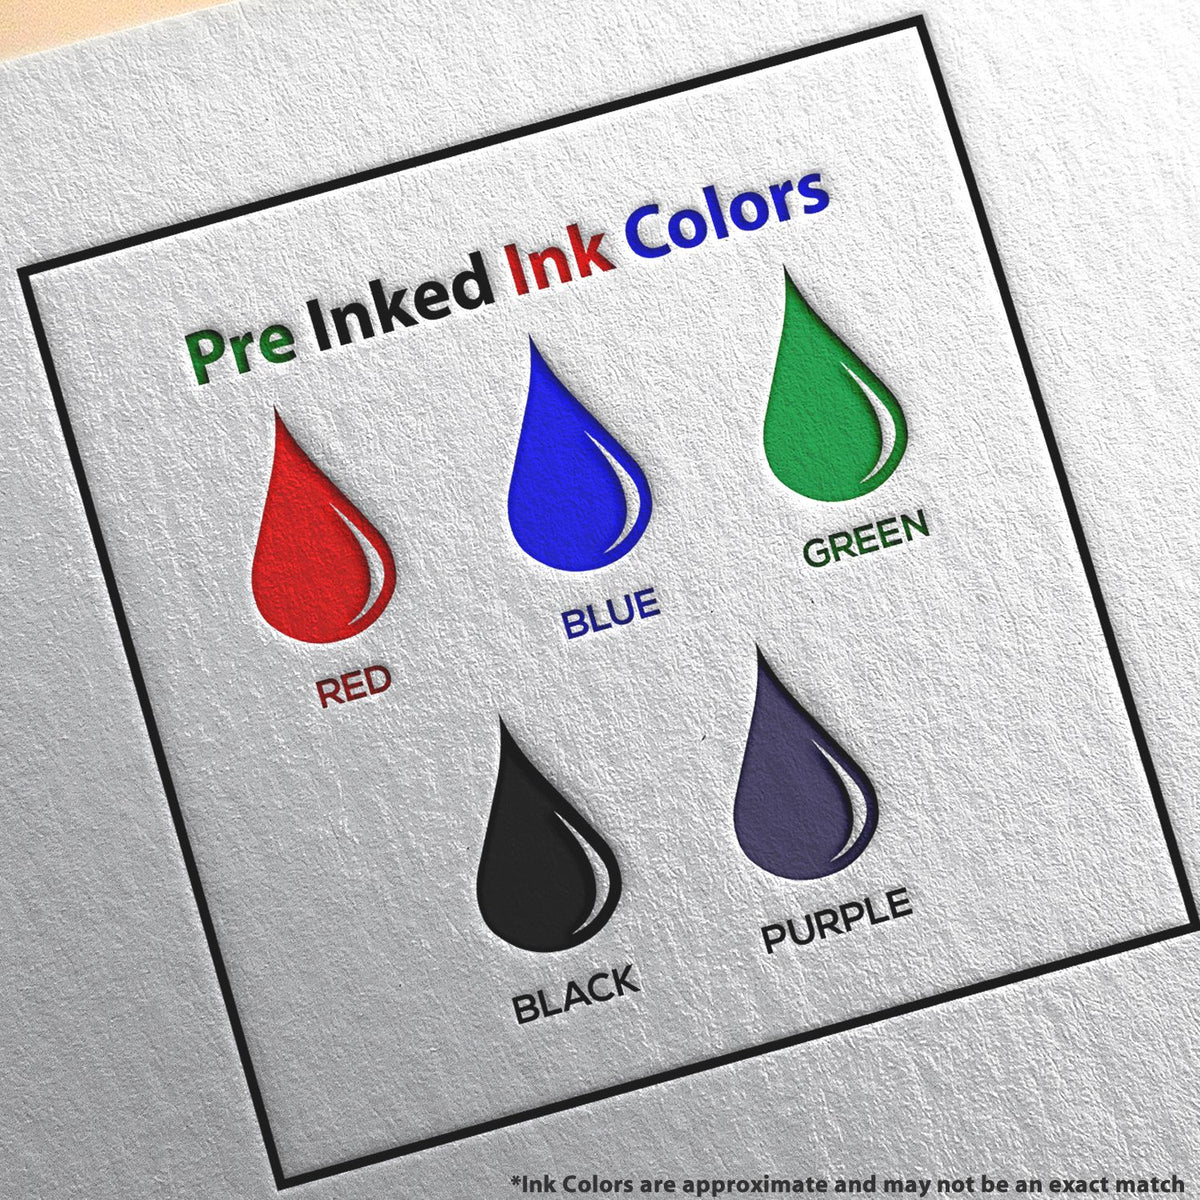 A picture showing the different ink colors or hues available for the Slim Pre-Inked New York Professional Engineer Seal Stamp product.